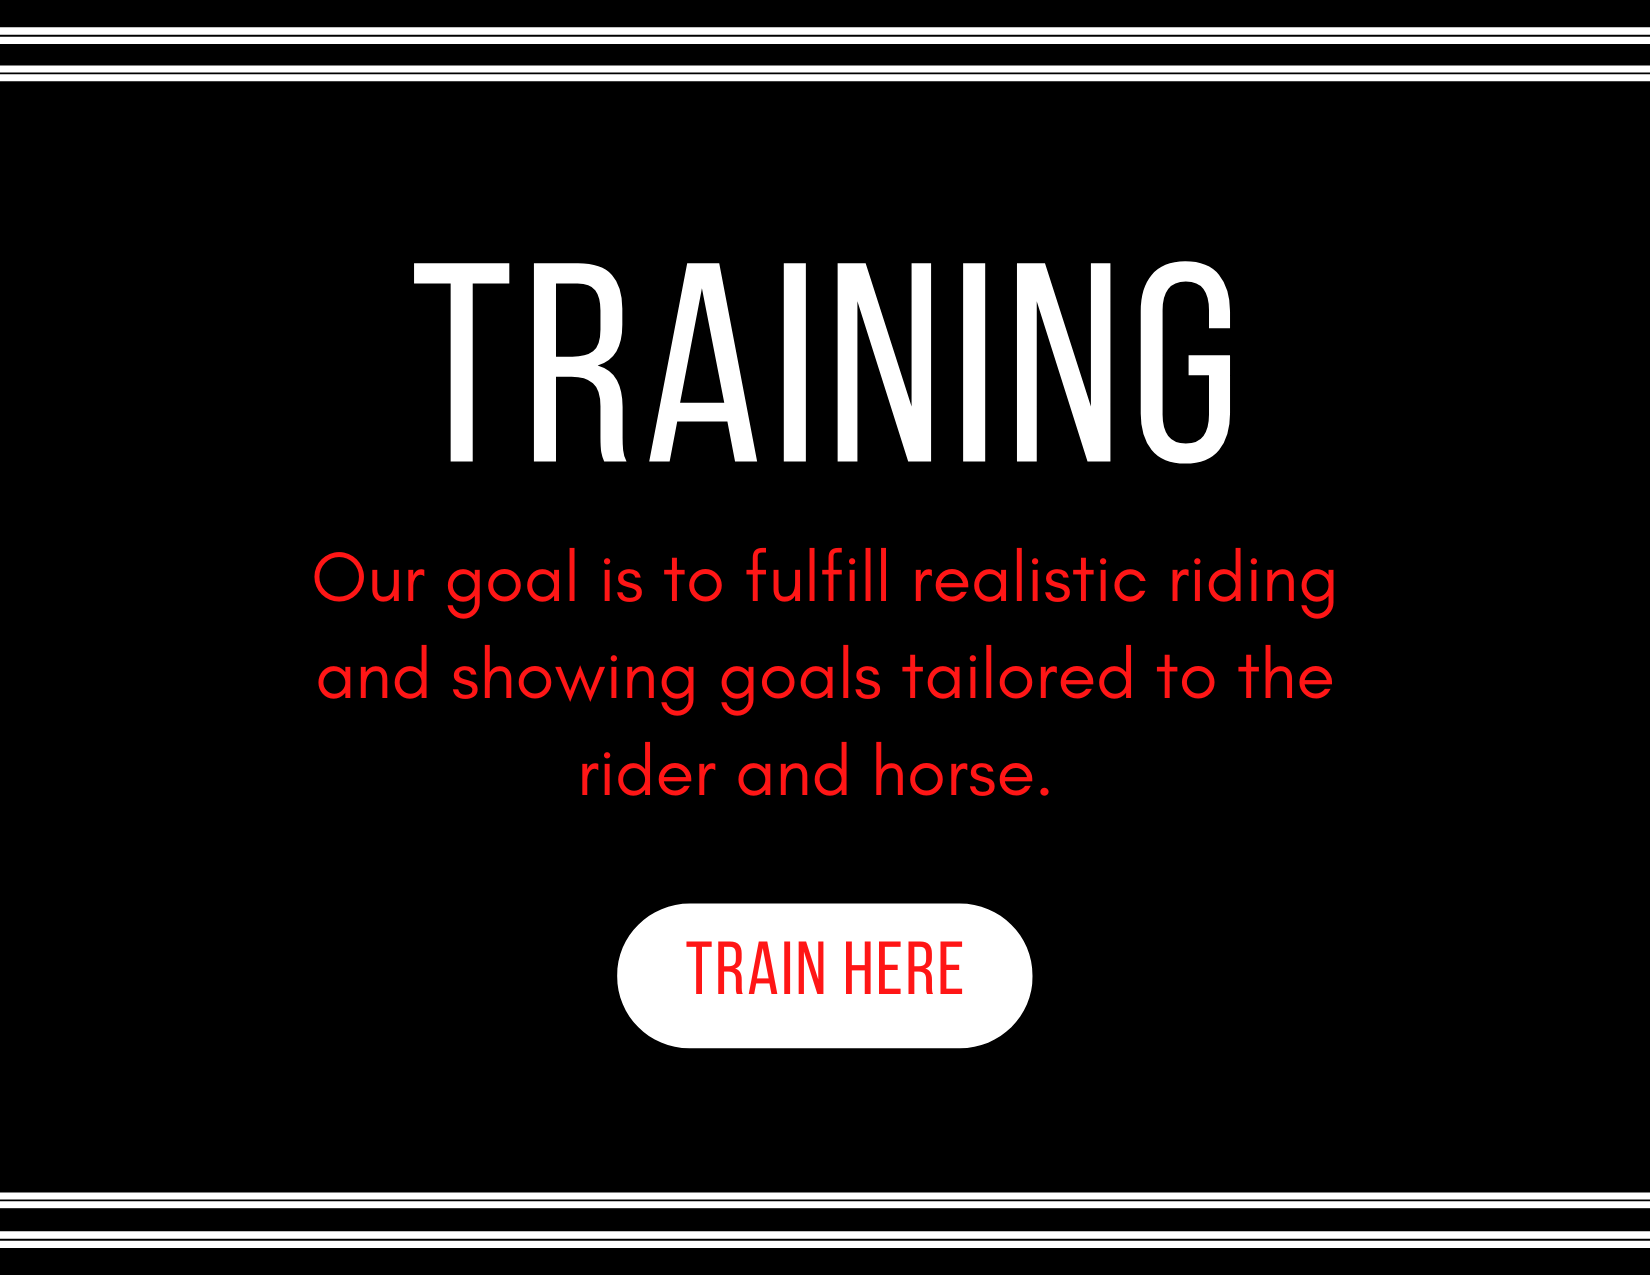 Our goal is to fulfill riding and showing goals tailored to the rider and horse.